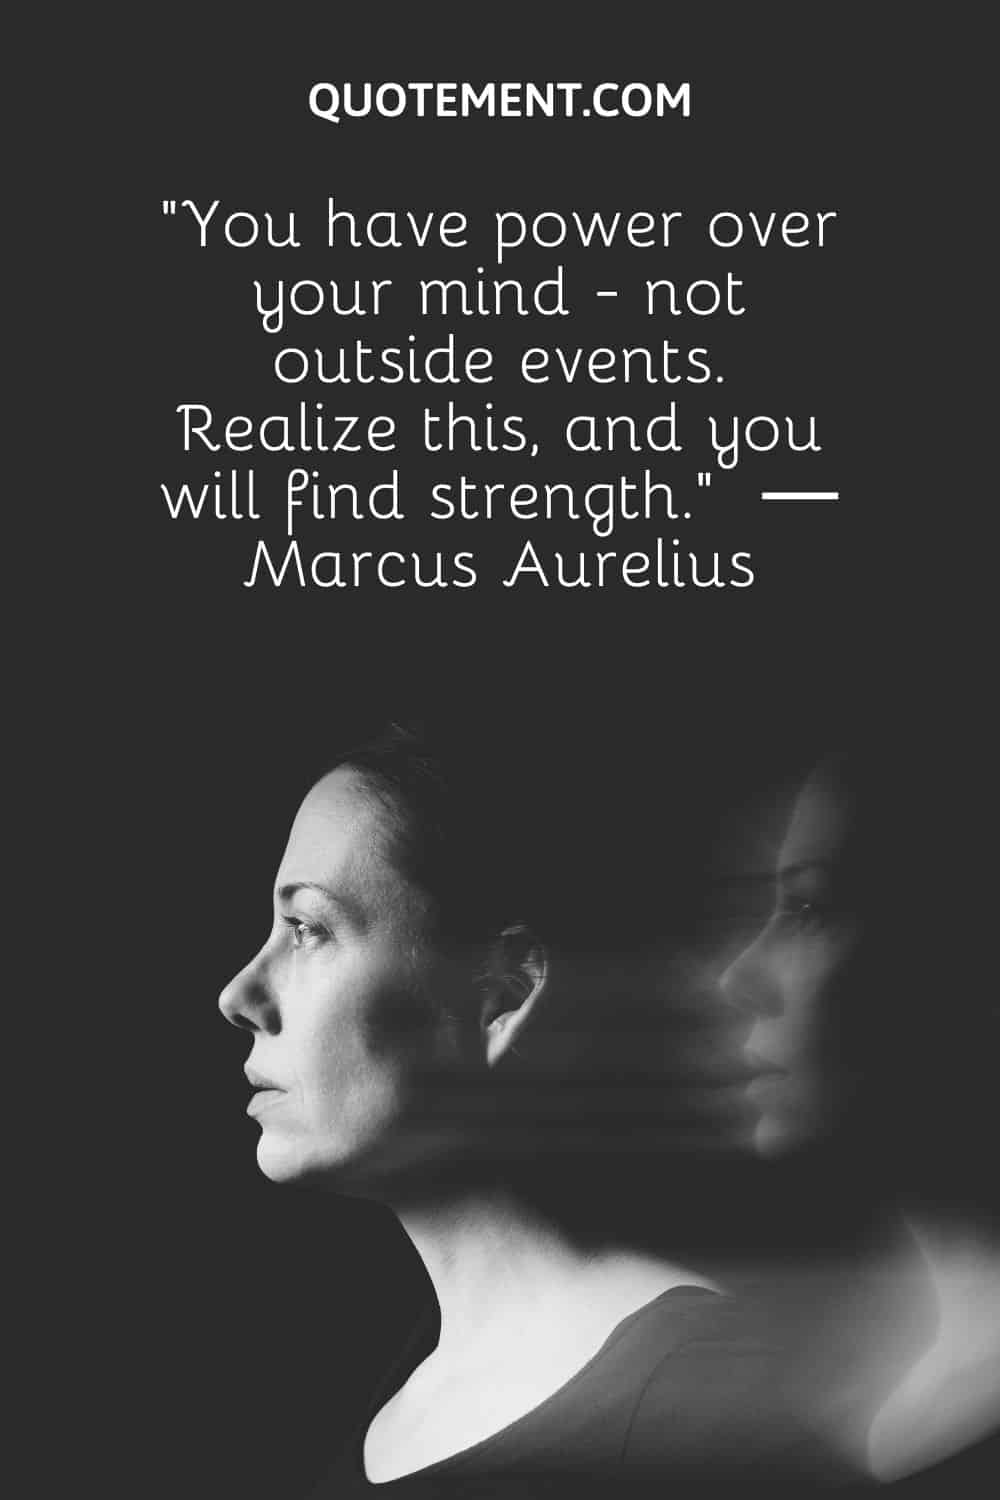 “You have power over your mind - not outside events. Realize this, and you will find strength.”  ― Marcus Aurelius